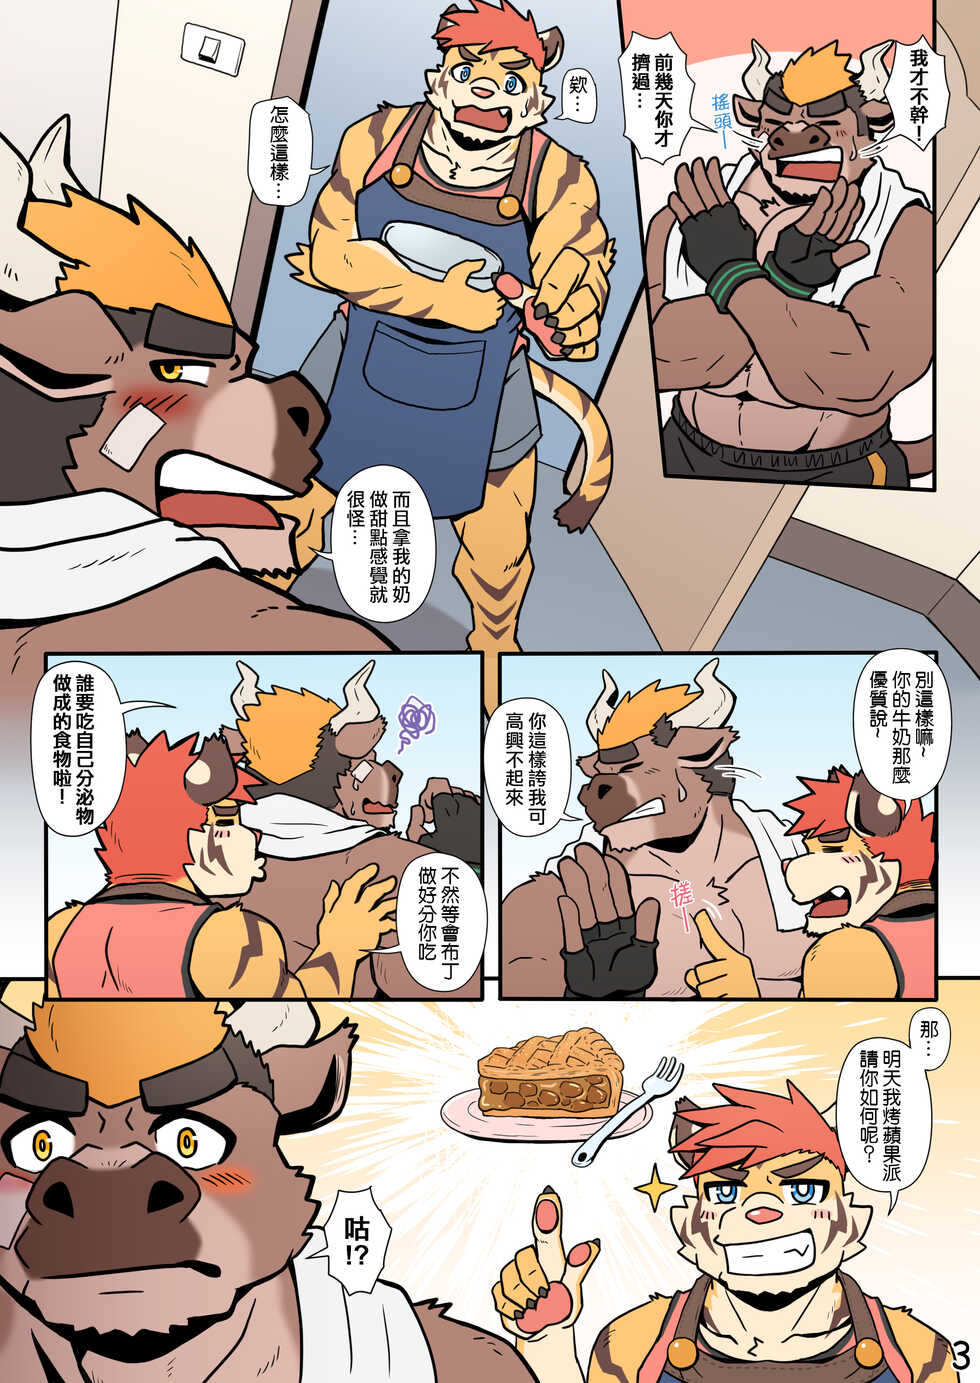 [Ripple Moon] My Milky Roomie: Homemade Pudding [Chinese] (Flat Color) - Page 4